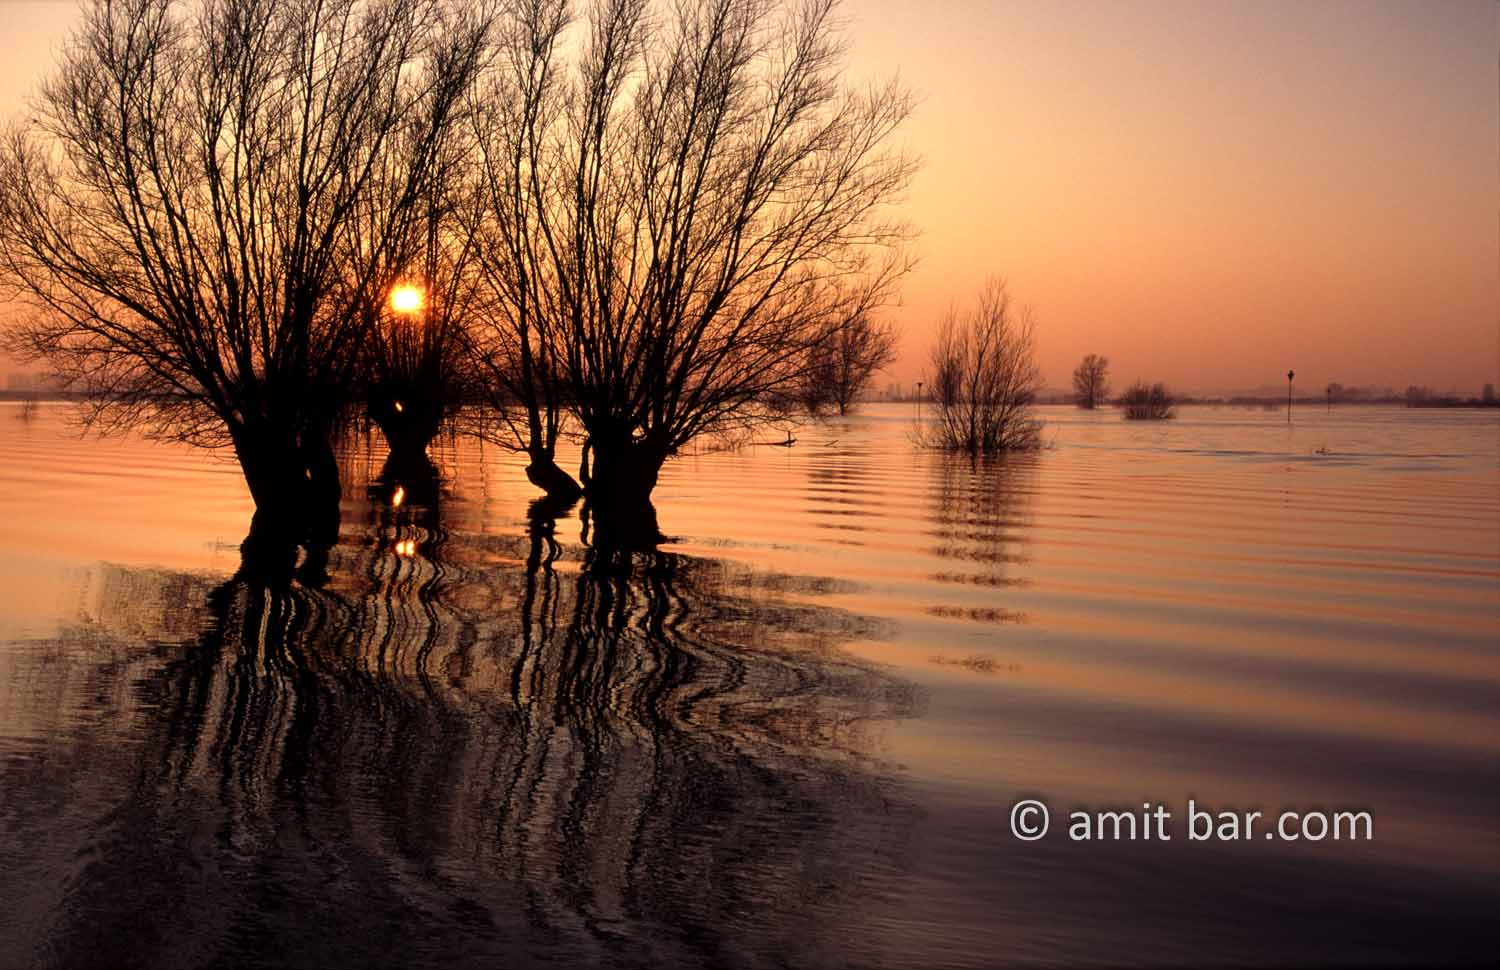 Willows at the IJssel river: Willows in the flooded river IJssel, The Netherlands